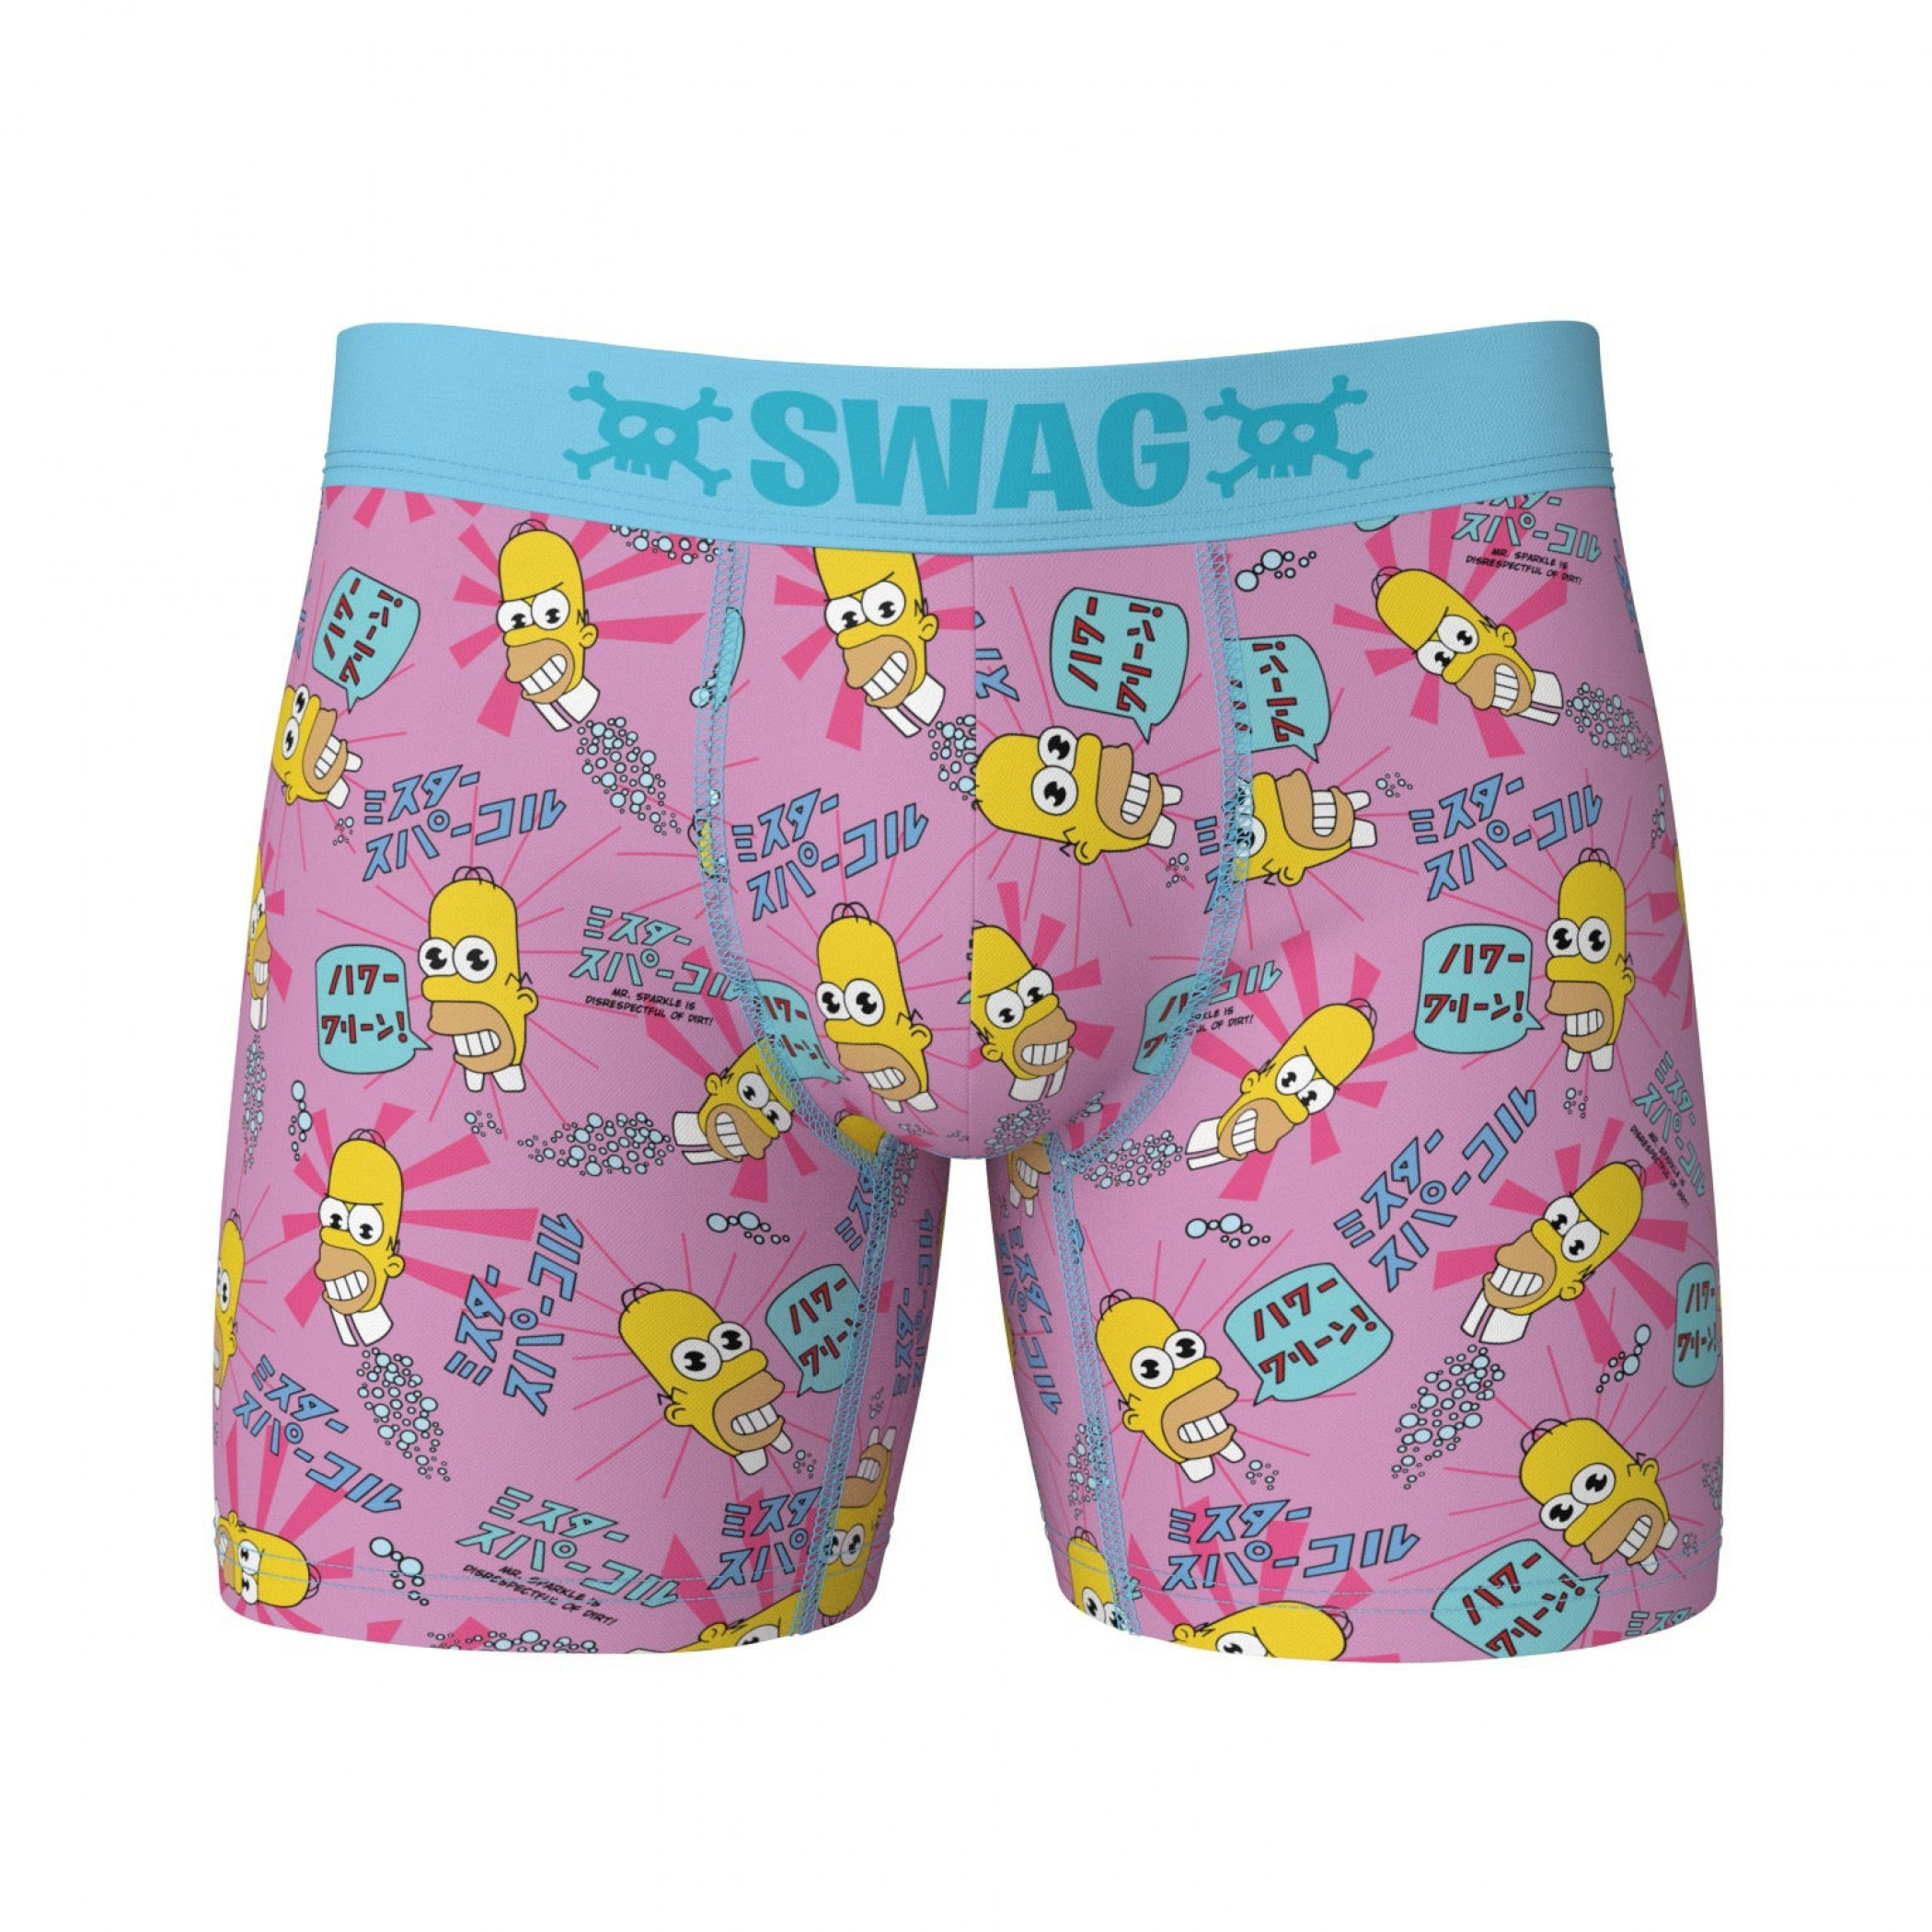 SWAG - The Simpsons: Springfield Boxers – SWAG Boxers